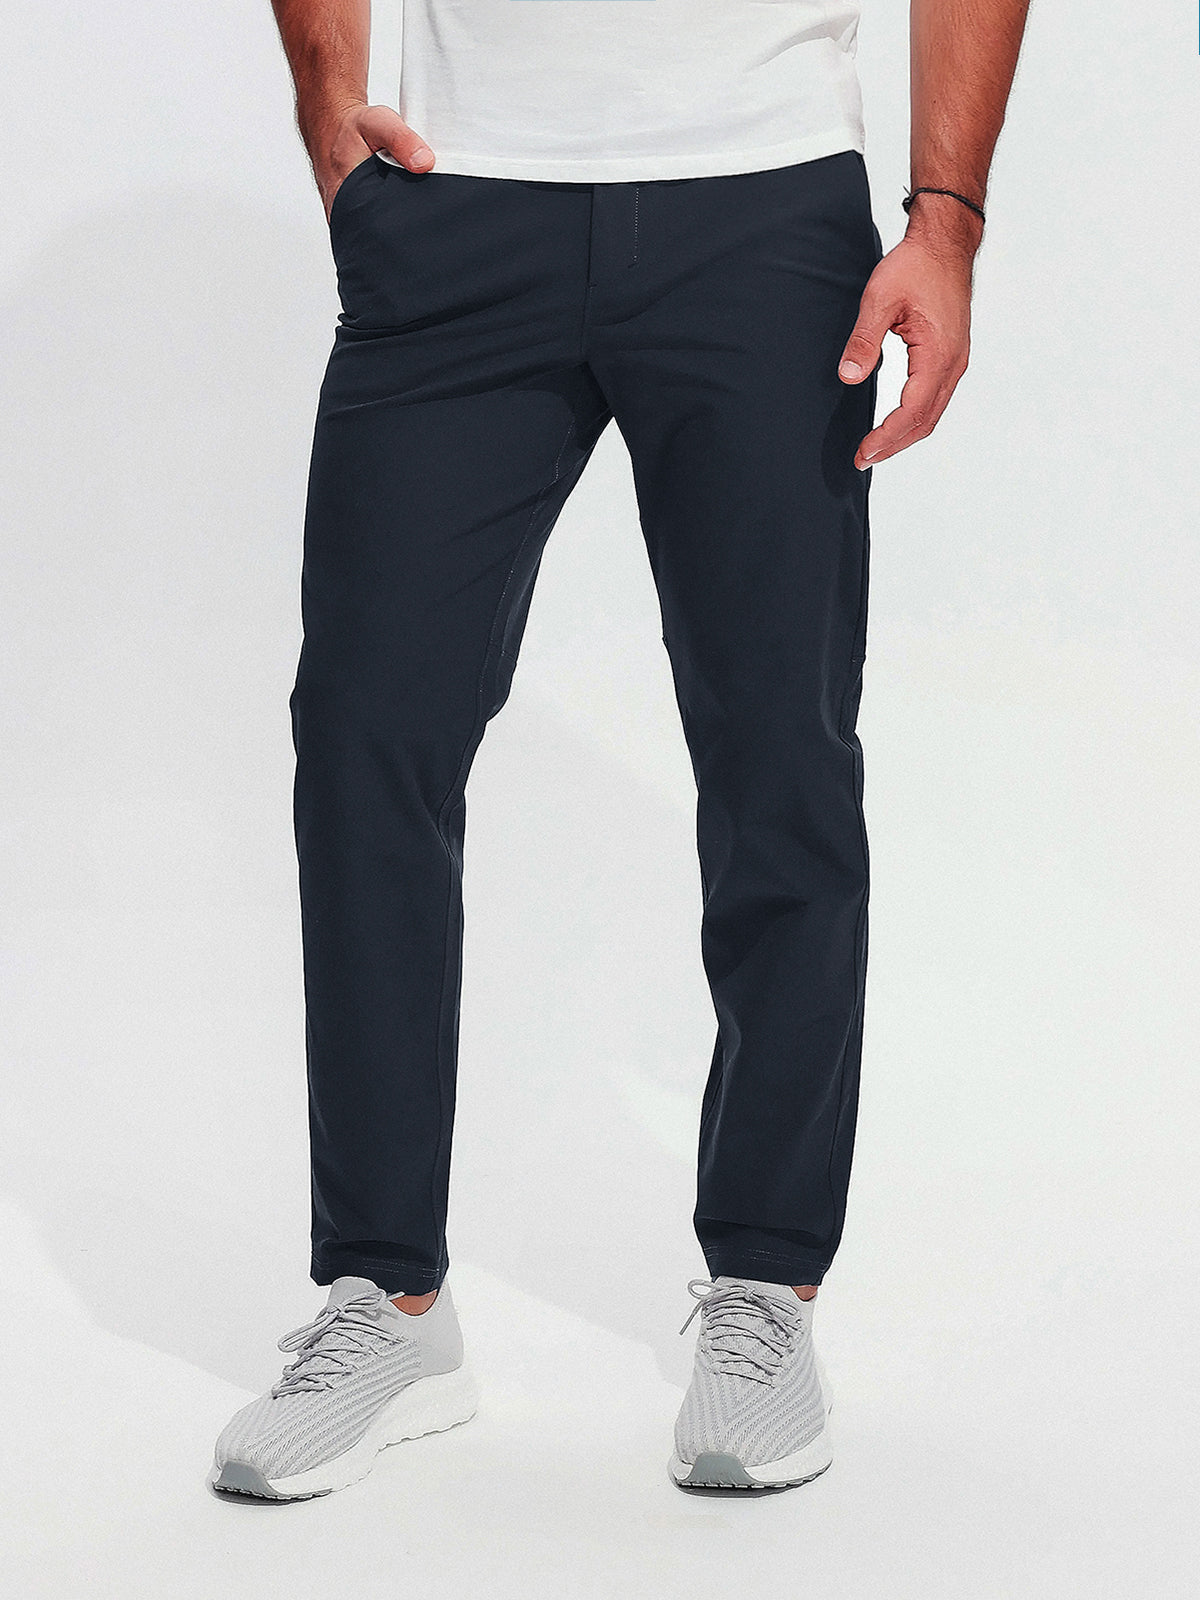 M's Commission Everyday Performance Chino Pants Artifact-Zittor